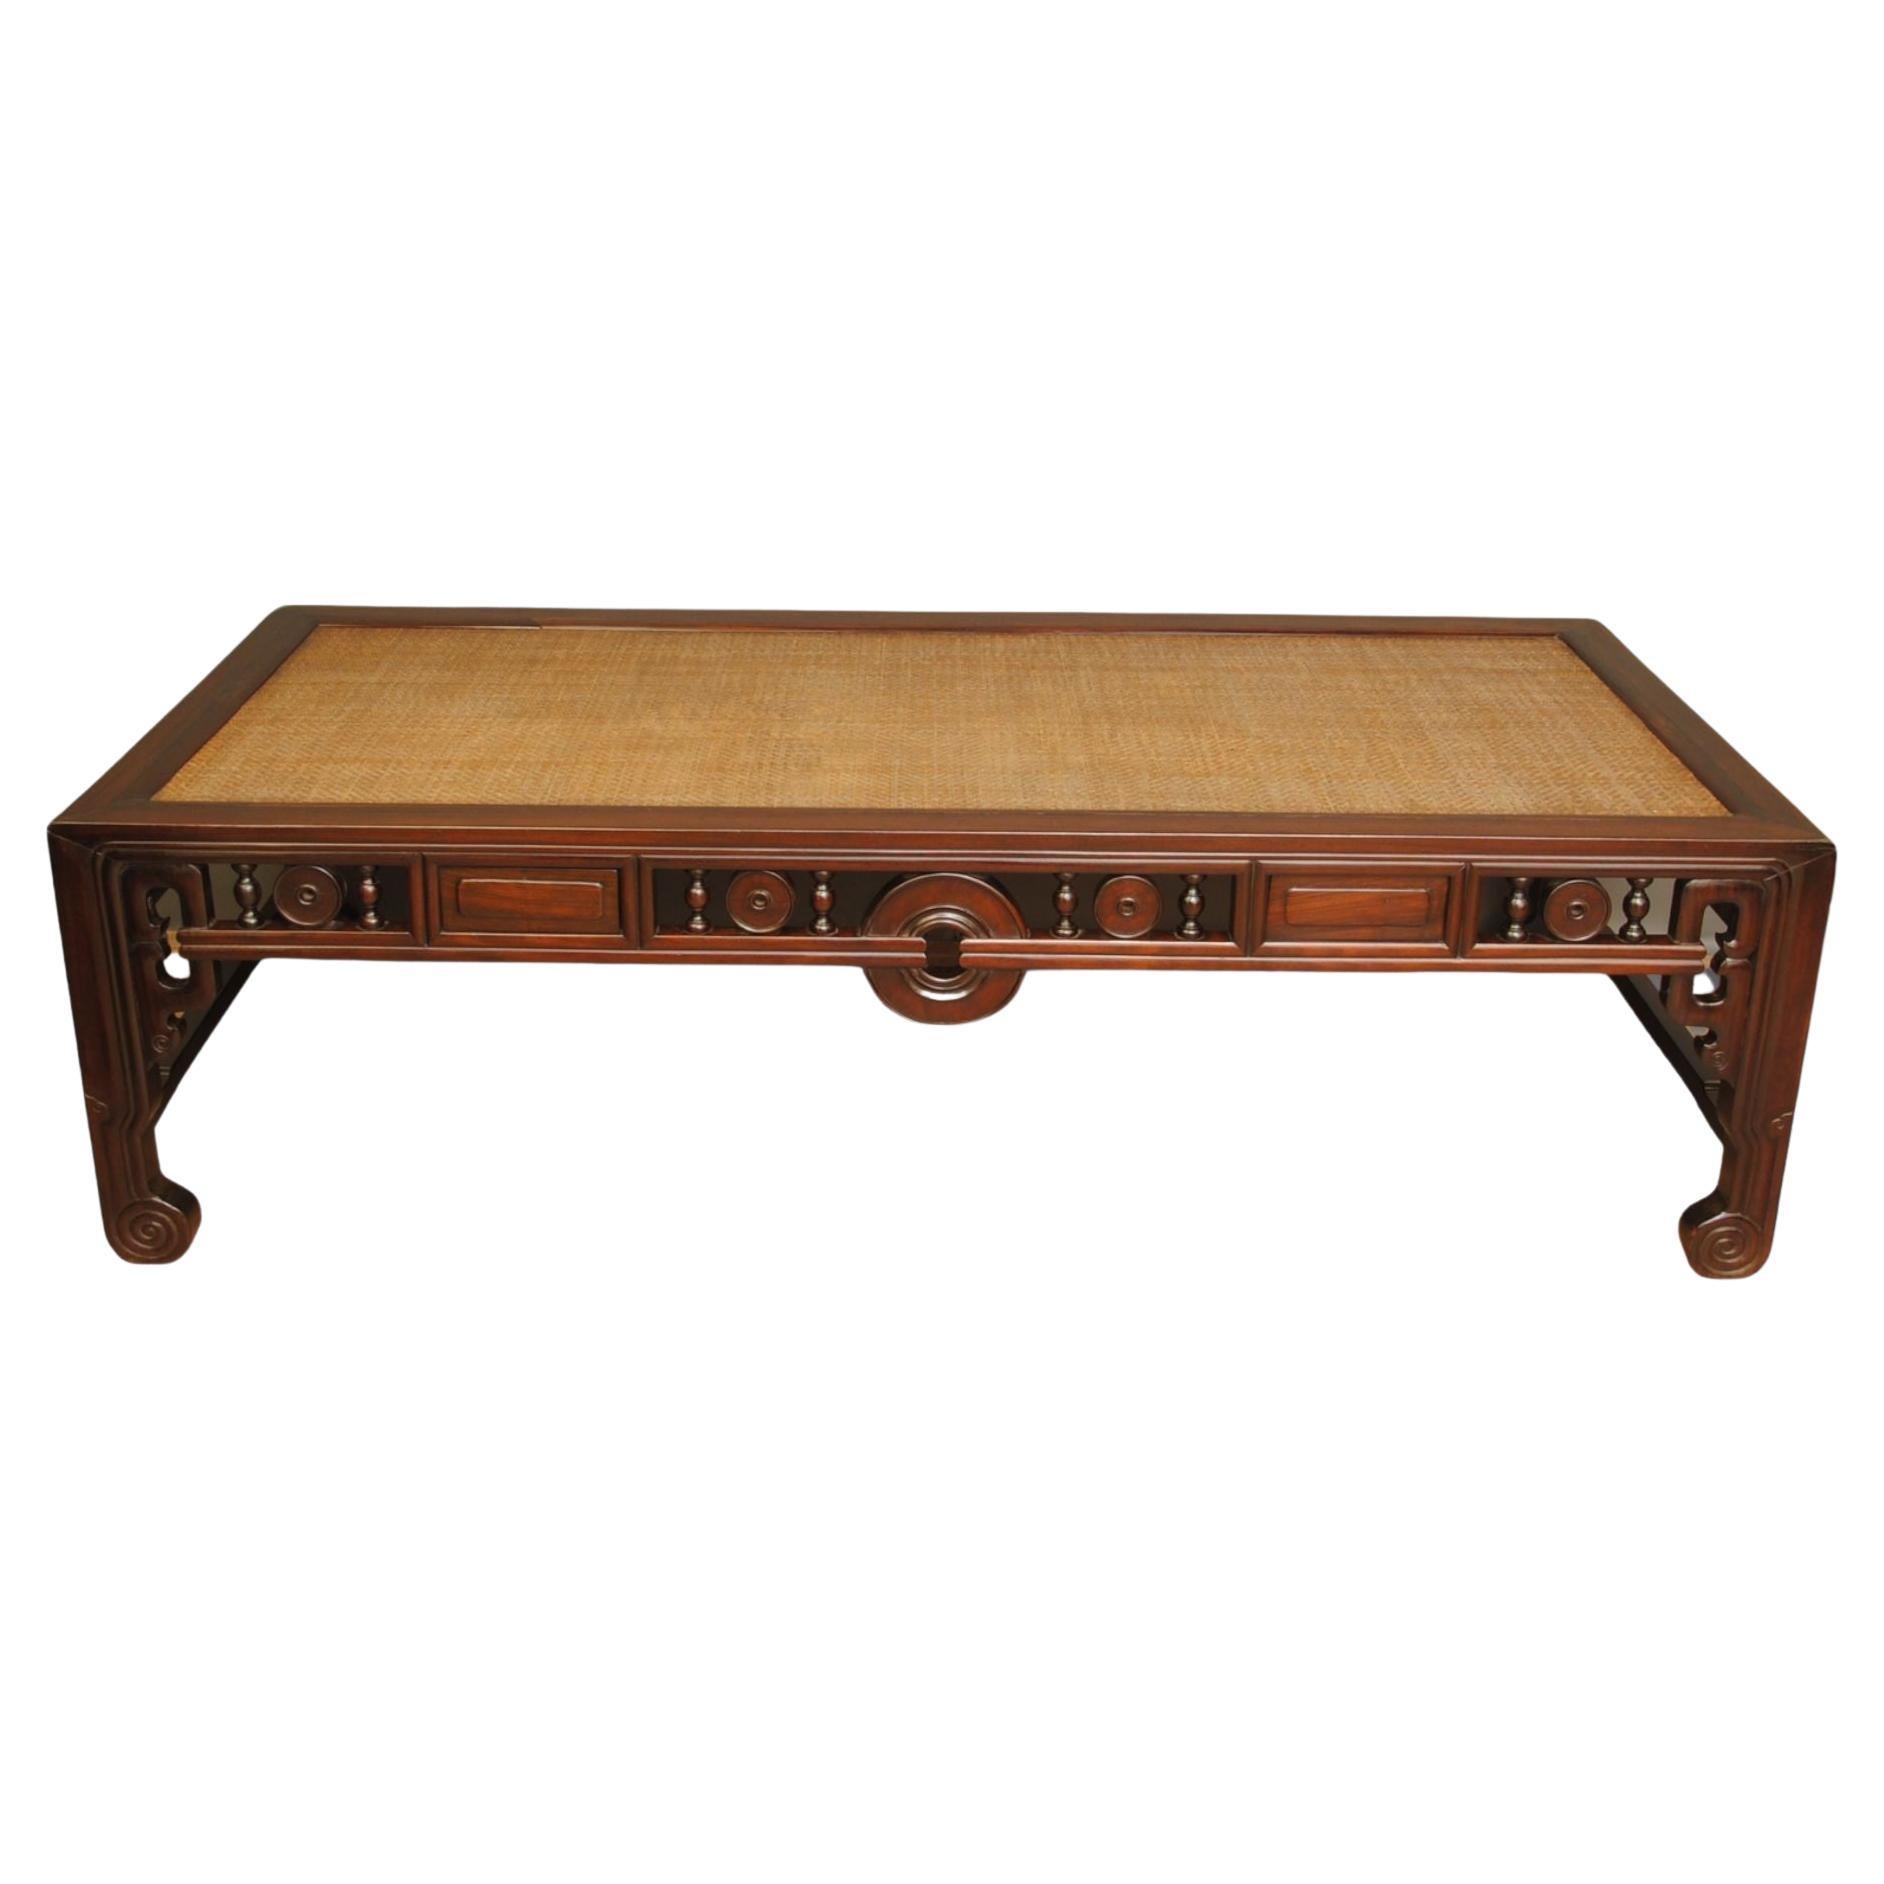 Chinese Hardwood Table Or Daybed